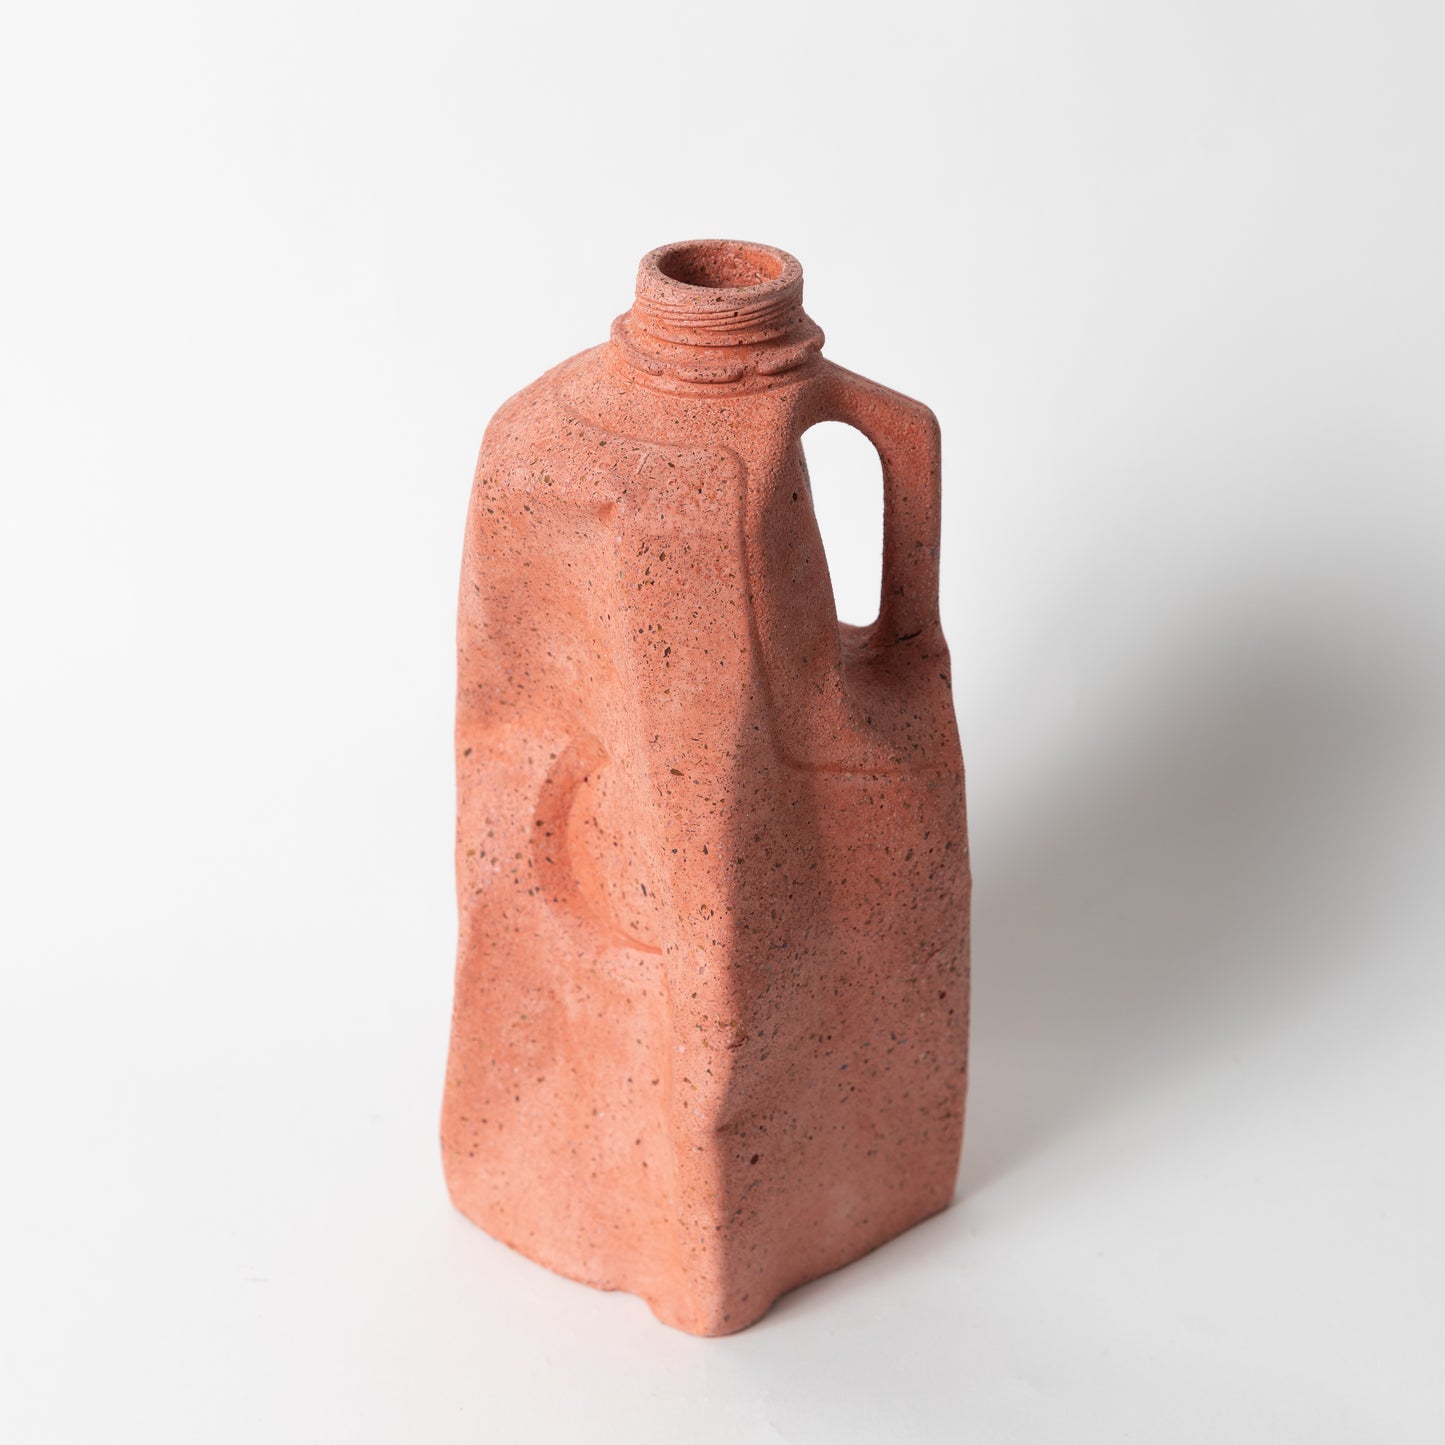 The coral terrazzo milk carton vase from our Garbage Collection.